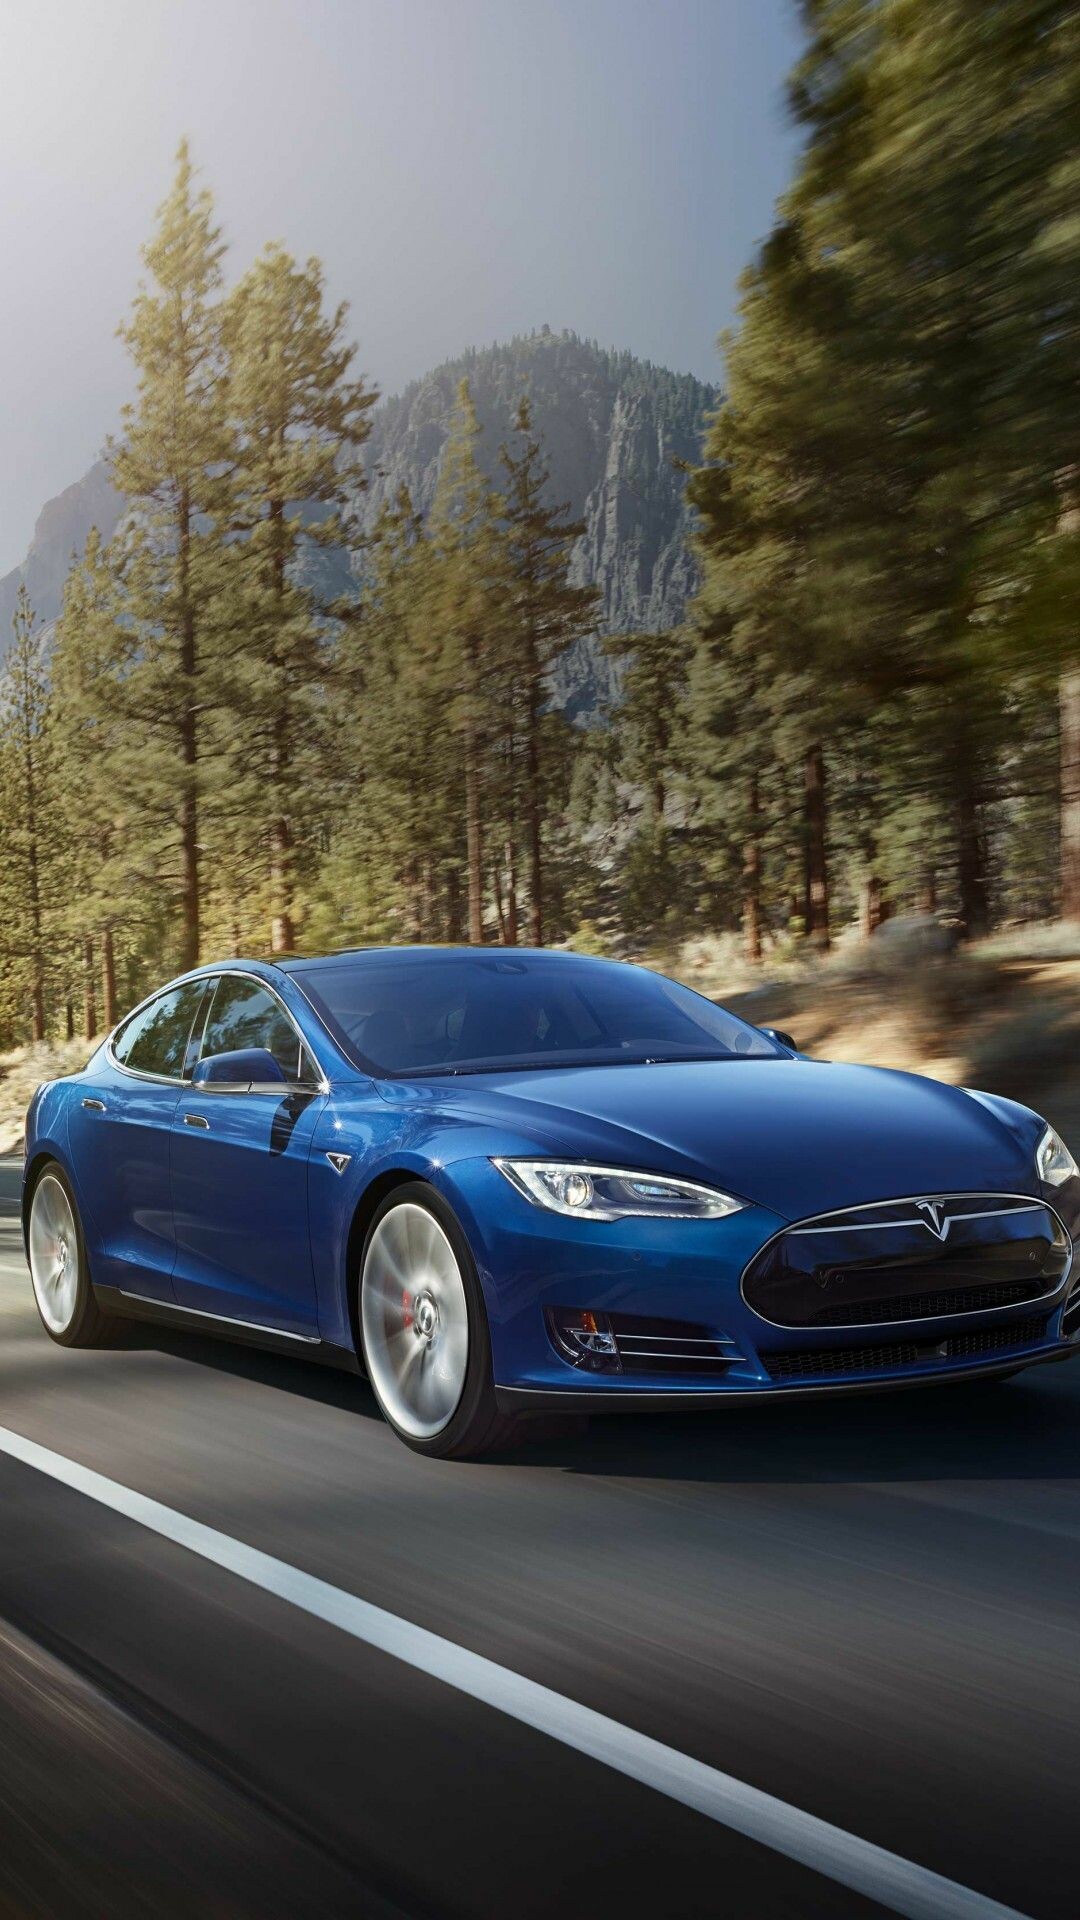 Tesla Model S: Electric vehicle, Well known for its Autopilot feature. 1080x1920 Full HD Background.